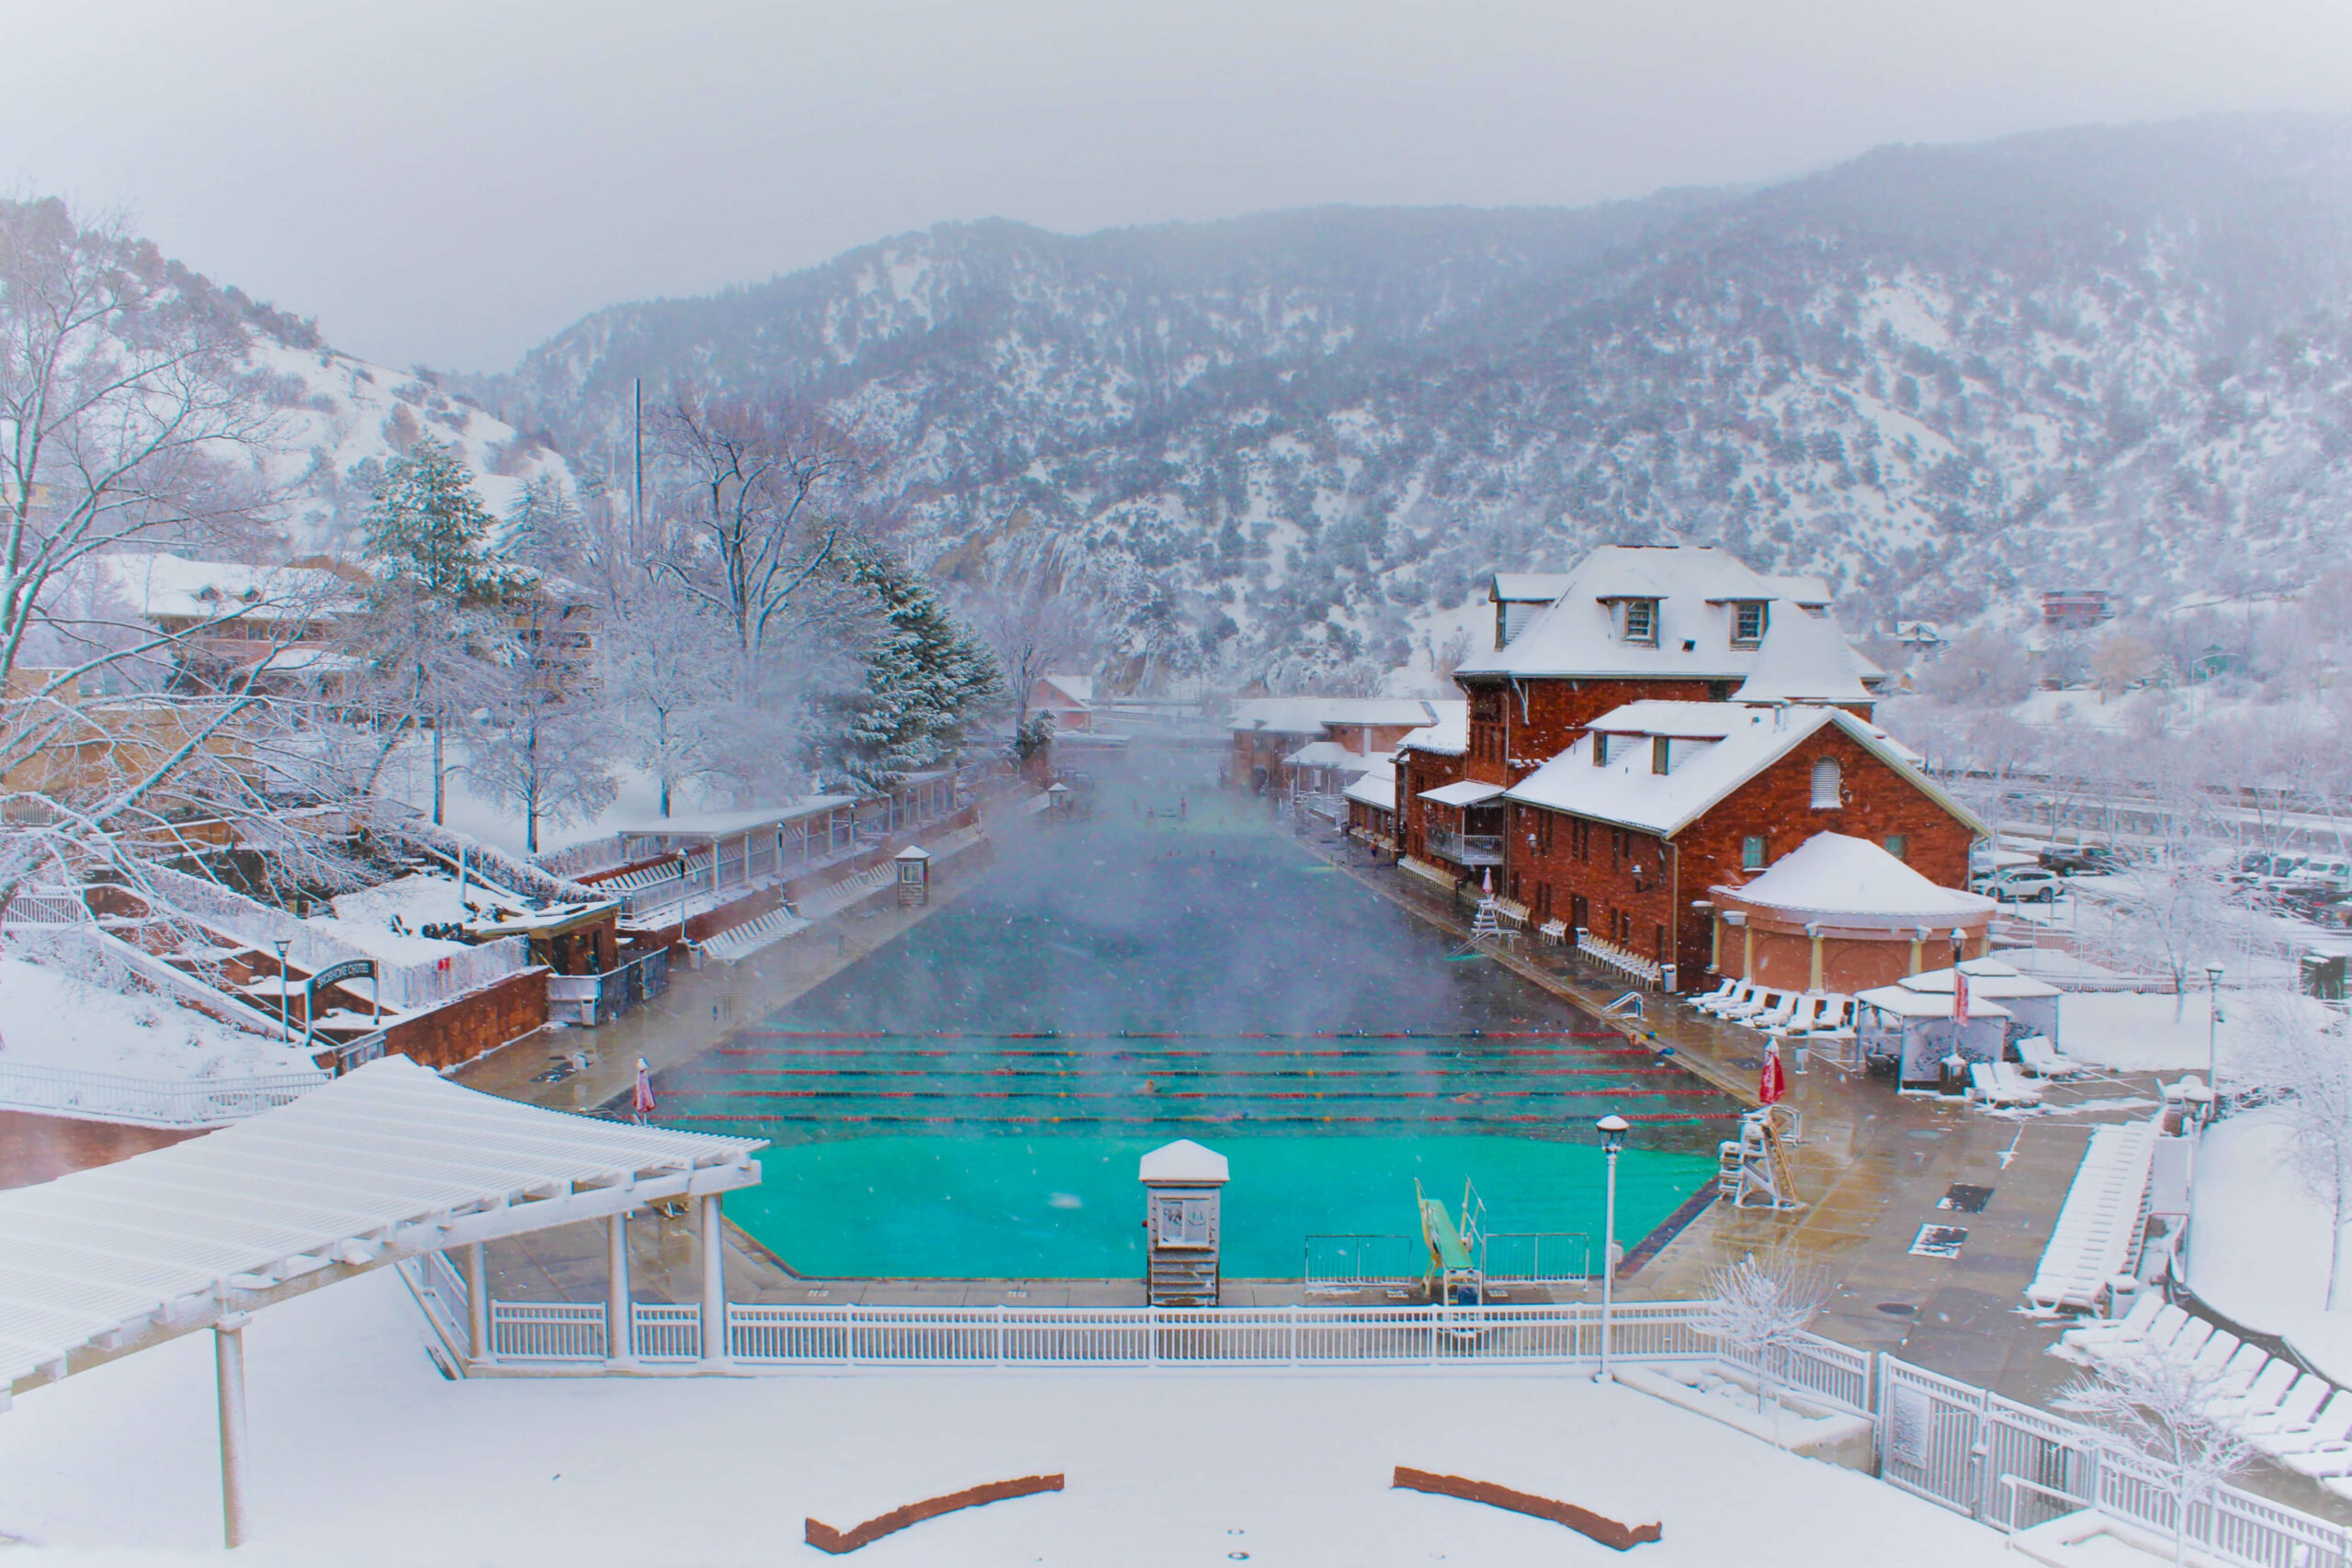 From this photo, capture the winter beauty of Glenwood Hot Springs pool from the pedestrian bridge, framed by snow-covered mountains.